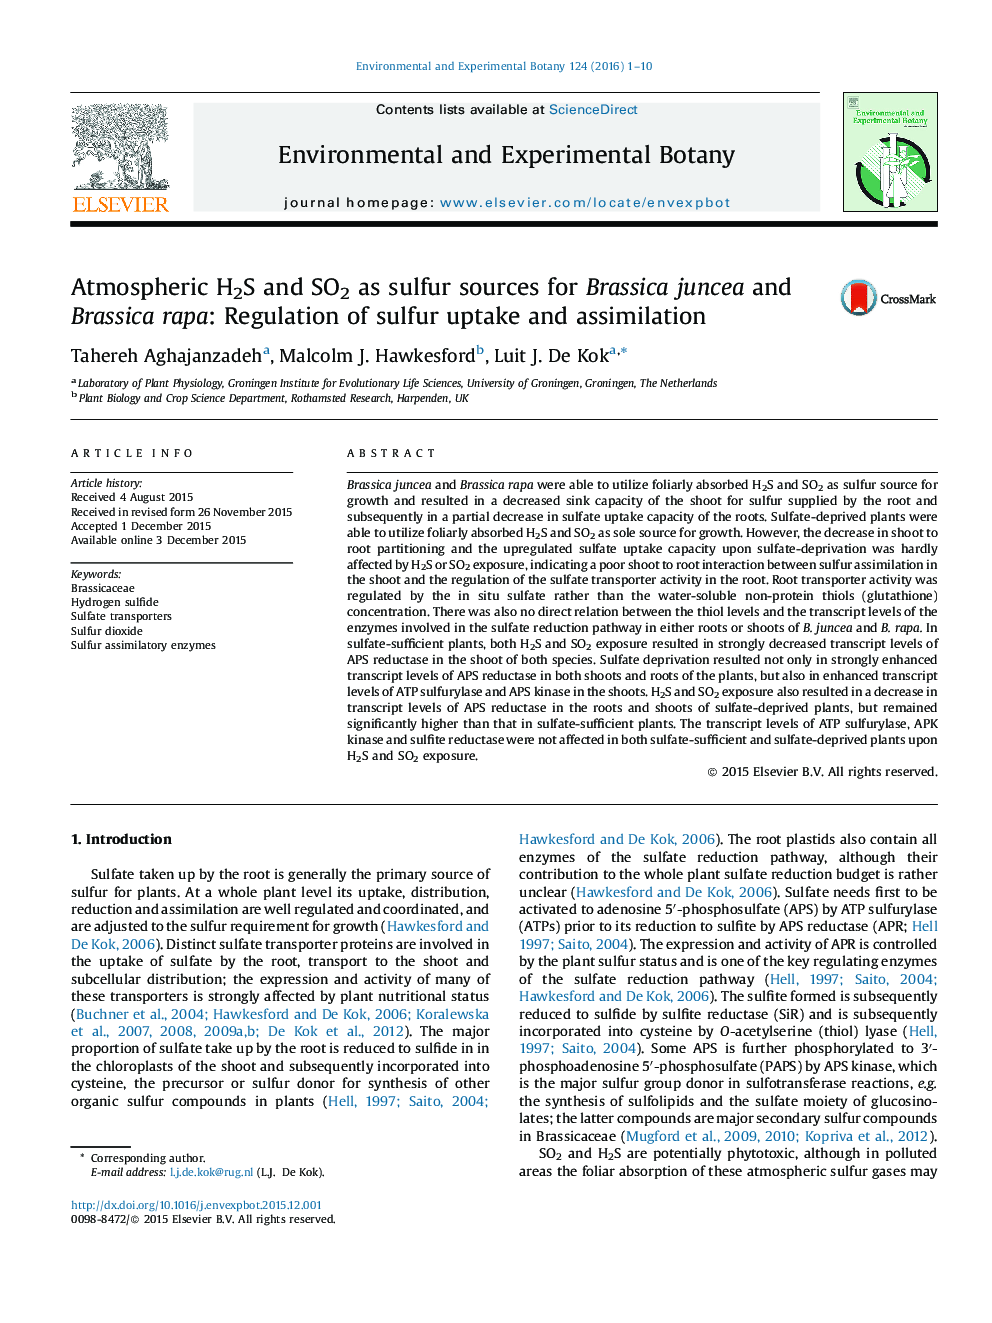 Atmospheric H2S and SO2 as sulfur sources for Brassica juncea and Brassica rapa: Regulation of sulfur uptake and assimilation